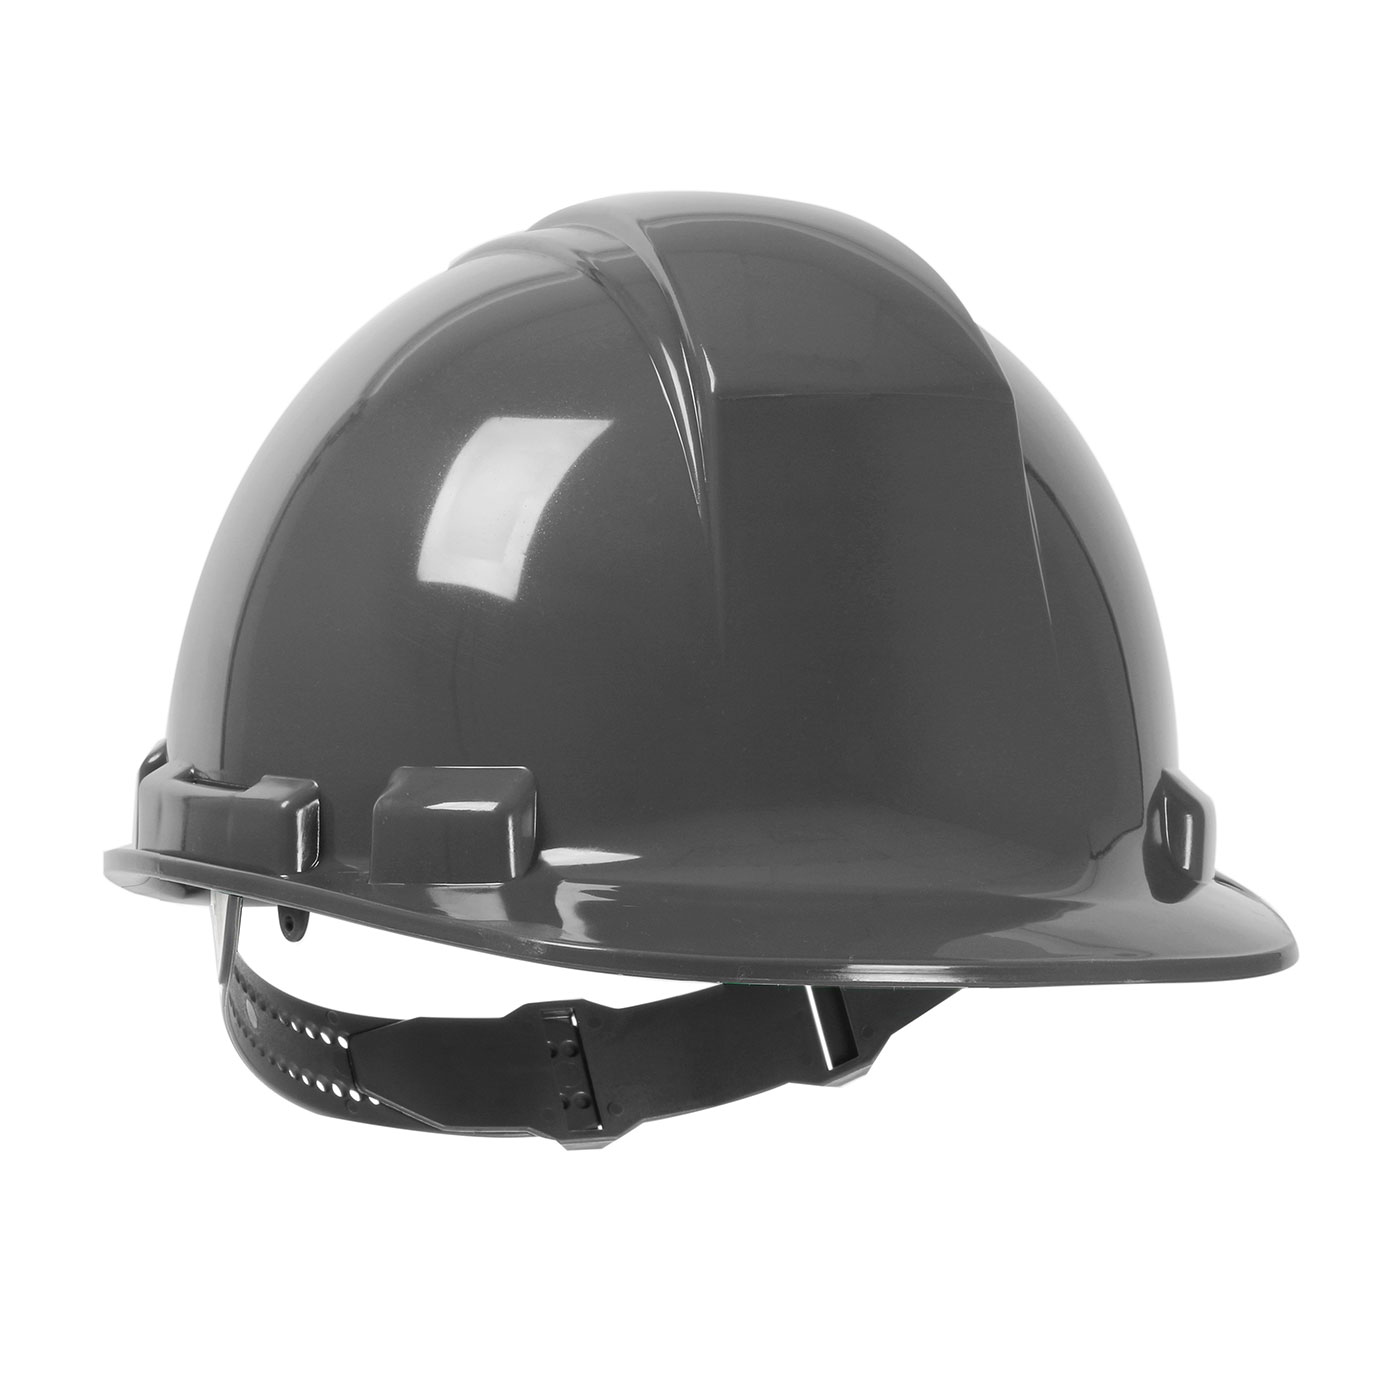 280-HP241 PIP® Dynamic Whistler™ Cap Style Hard Hat with HDPE Shell, 4-Point Textile Suspension and Pin-Lock Adjustment - Dark Gray